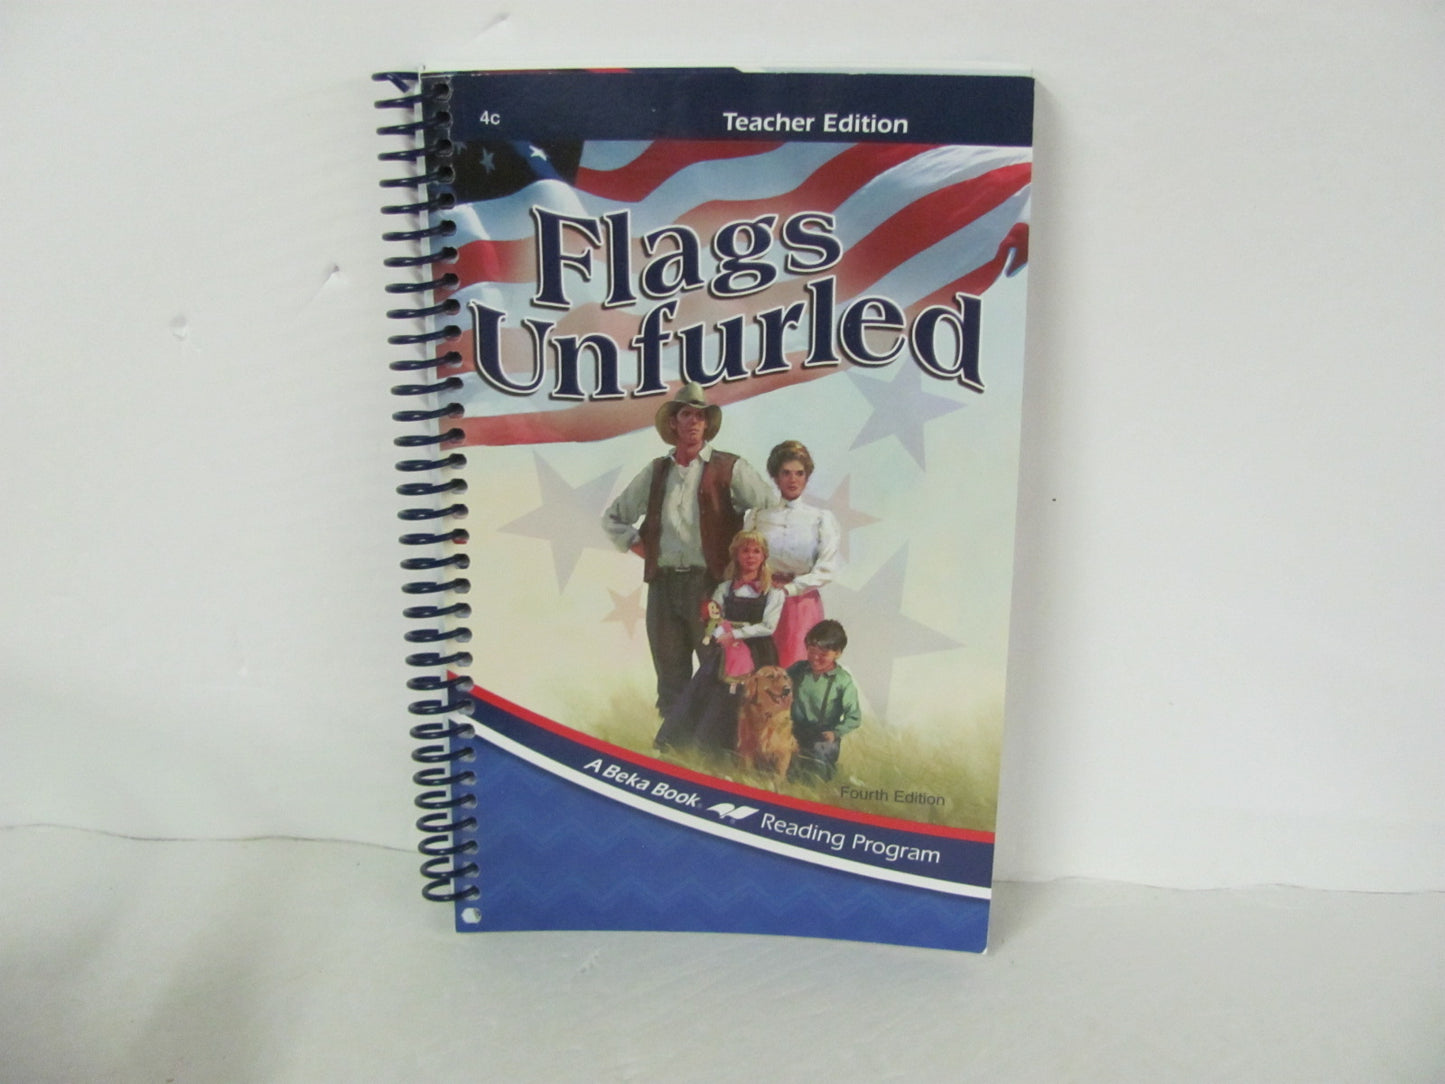 Flags Unfurled Abeka Teacher Edition  Pre-Owned 4th Grade Reading Textbooks